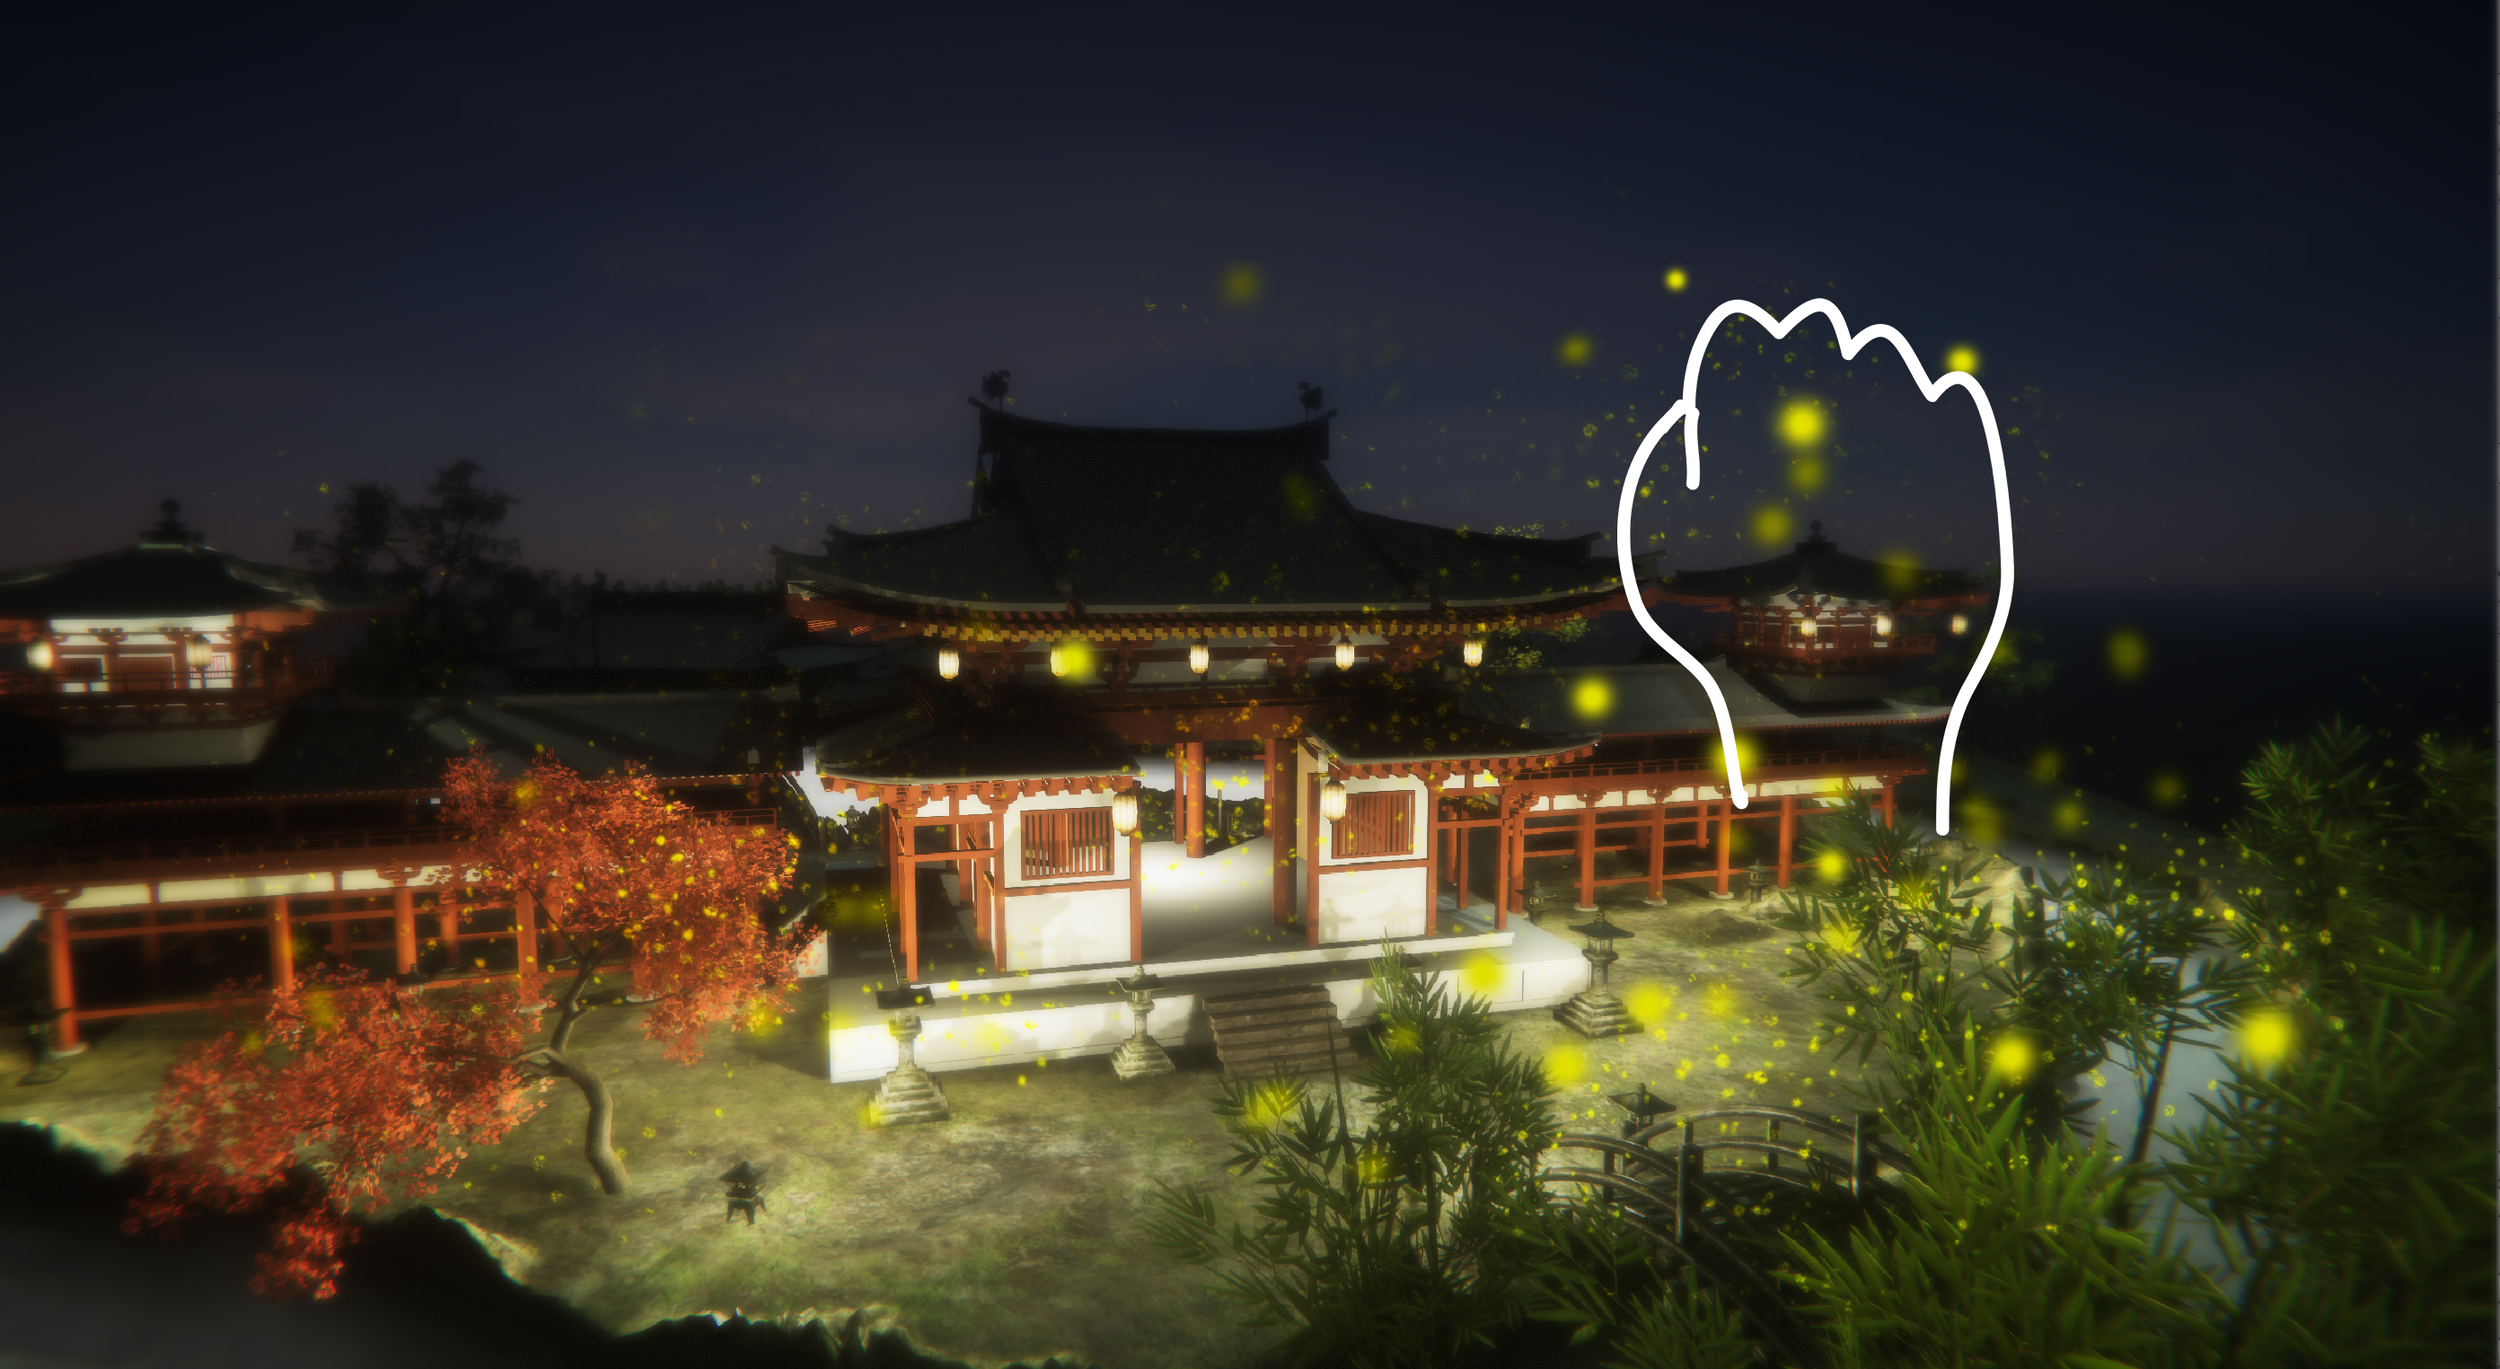 The player catch and drag the fireflies into the stone lantern.